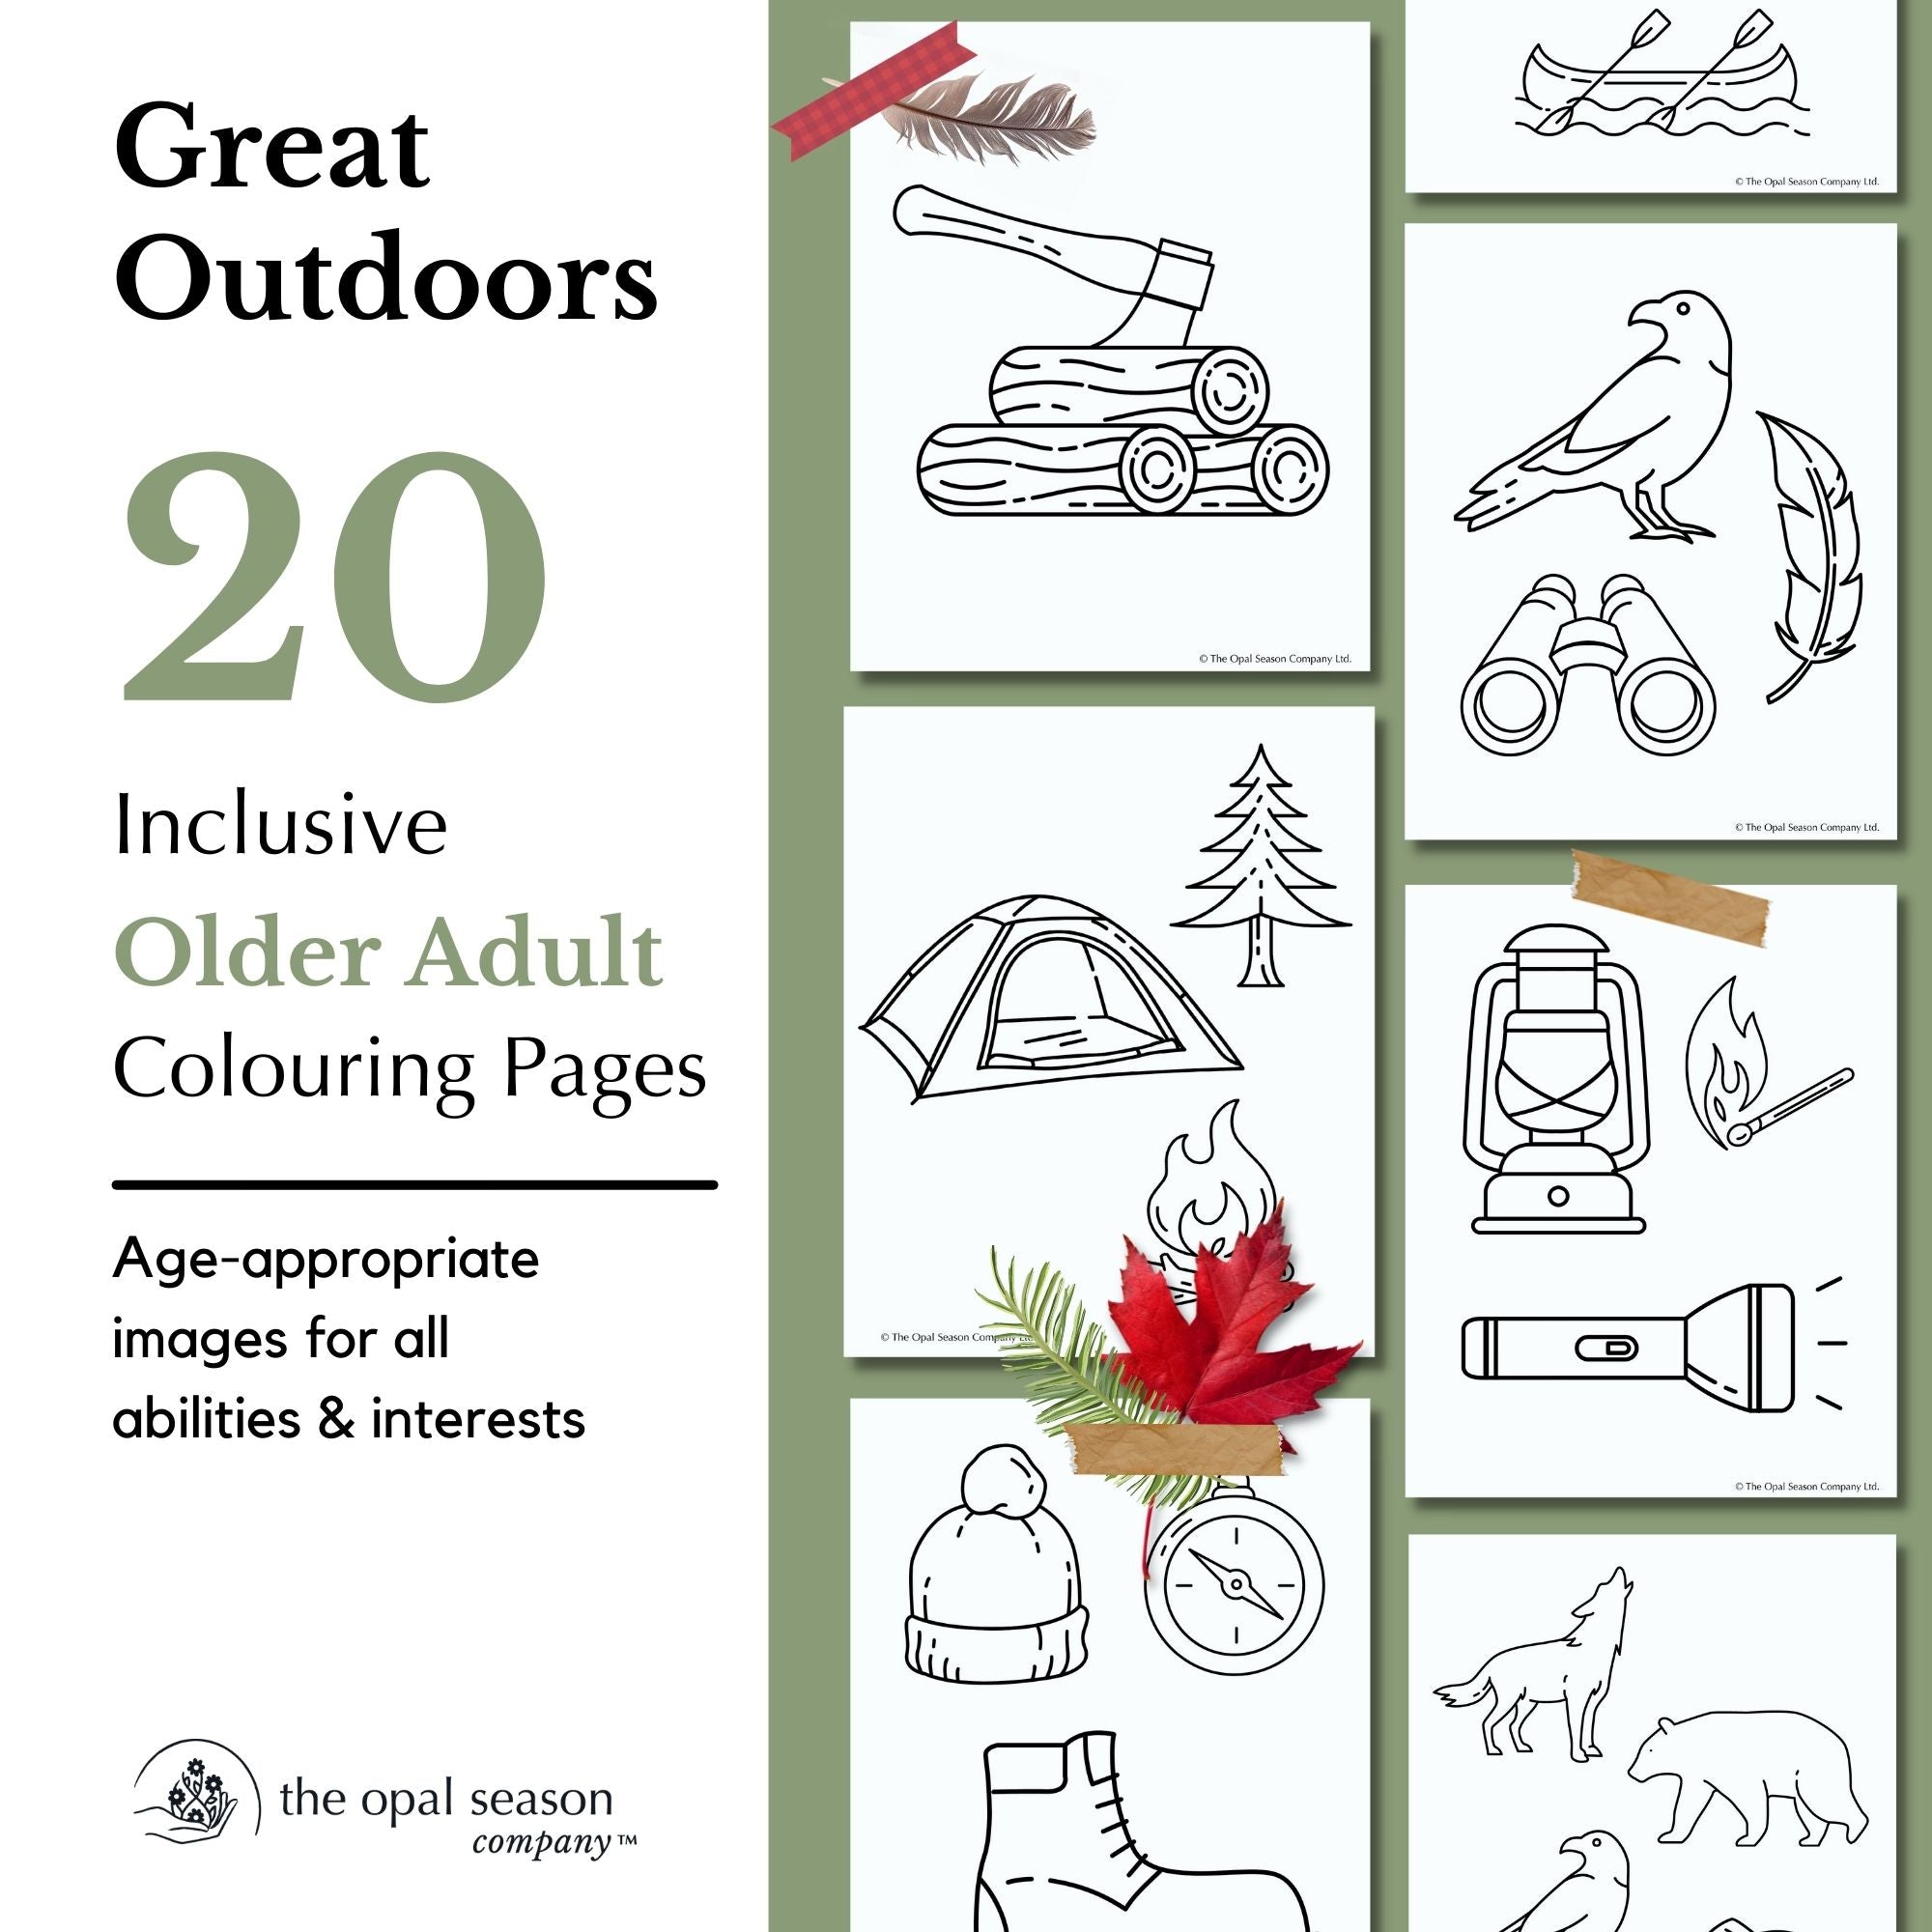 The great outdoors colouring pages â the opal season pany